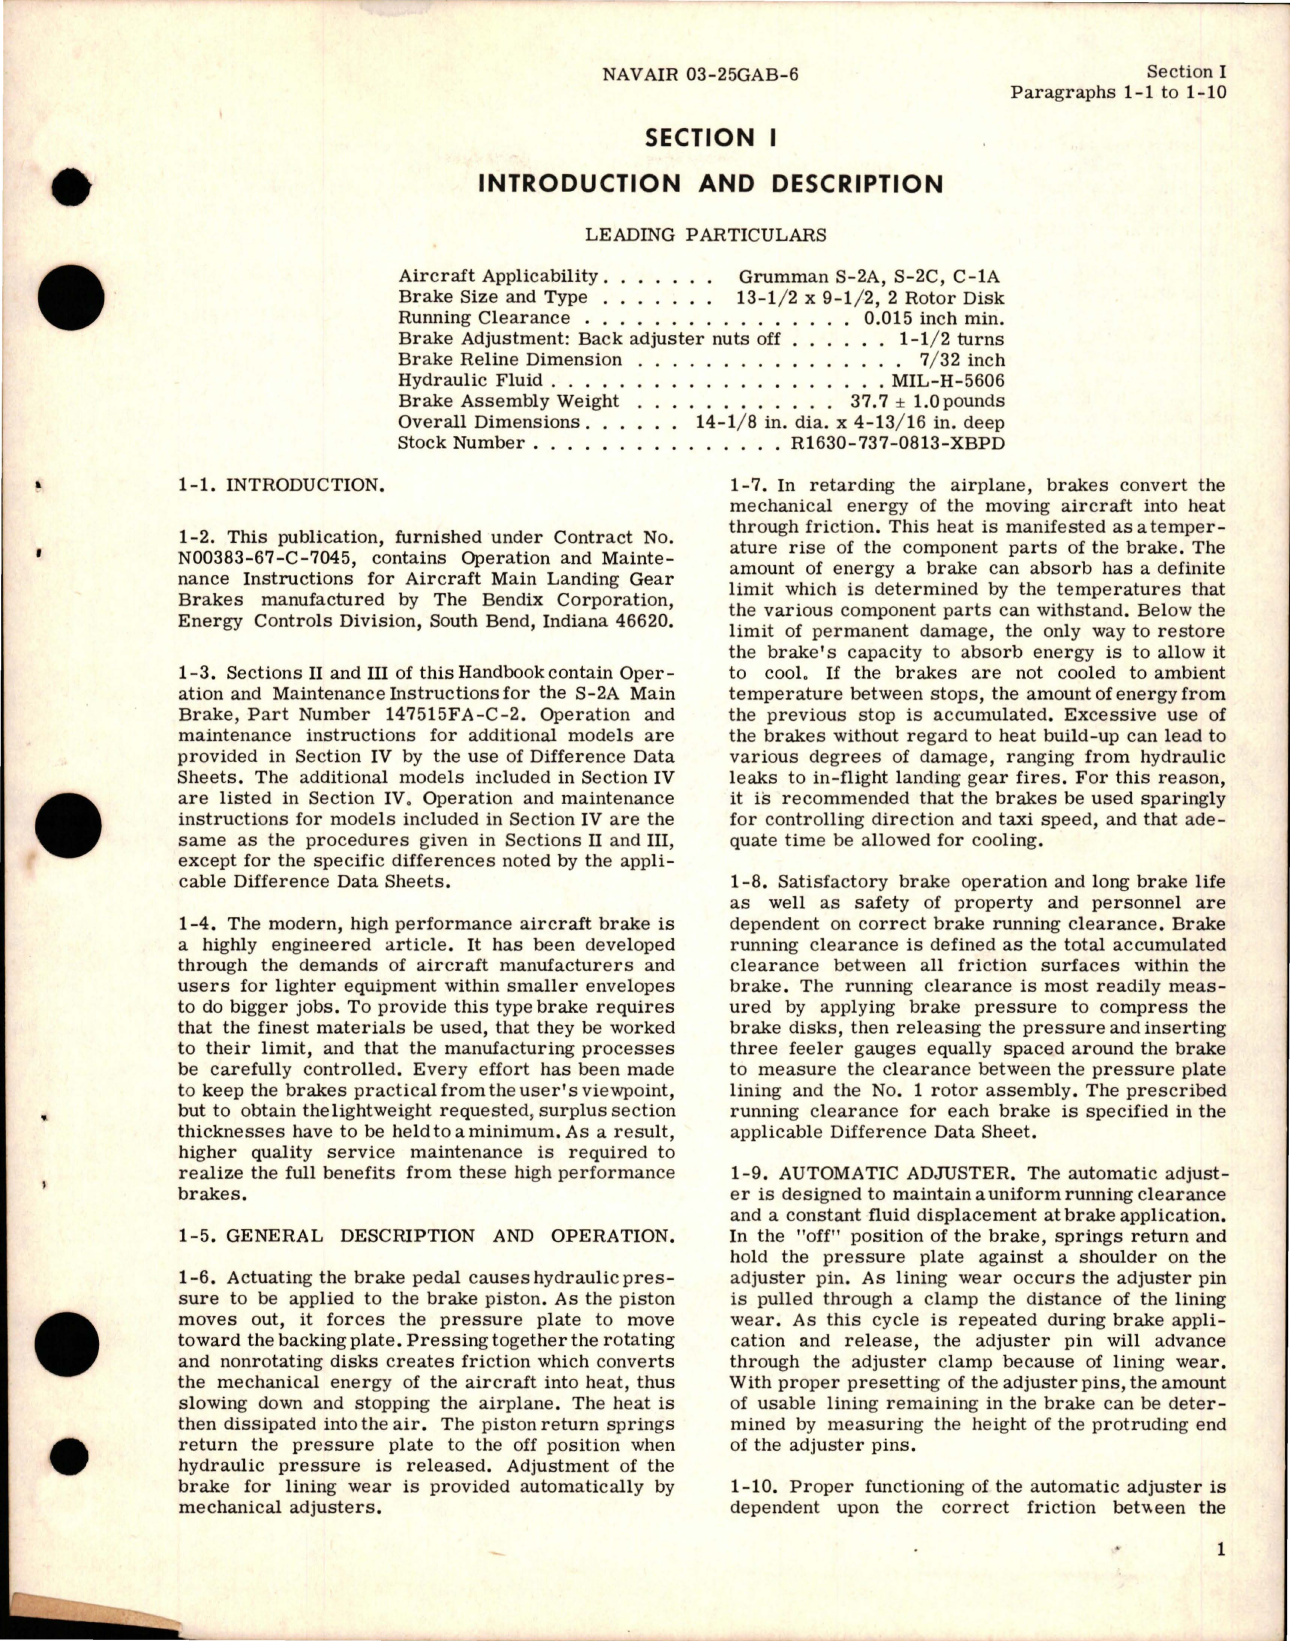 Sample page 5 from AirCorps Library document: Operation and Maintenance Instructions for Main Landing Gear Brake Assemblies